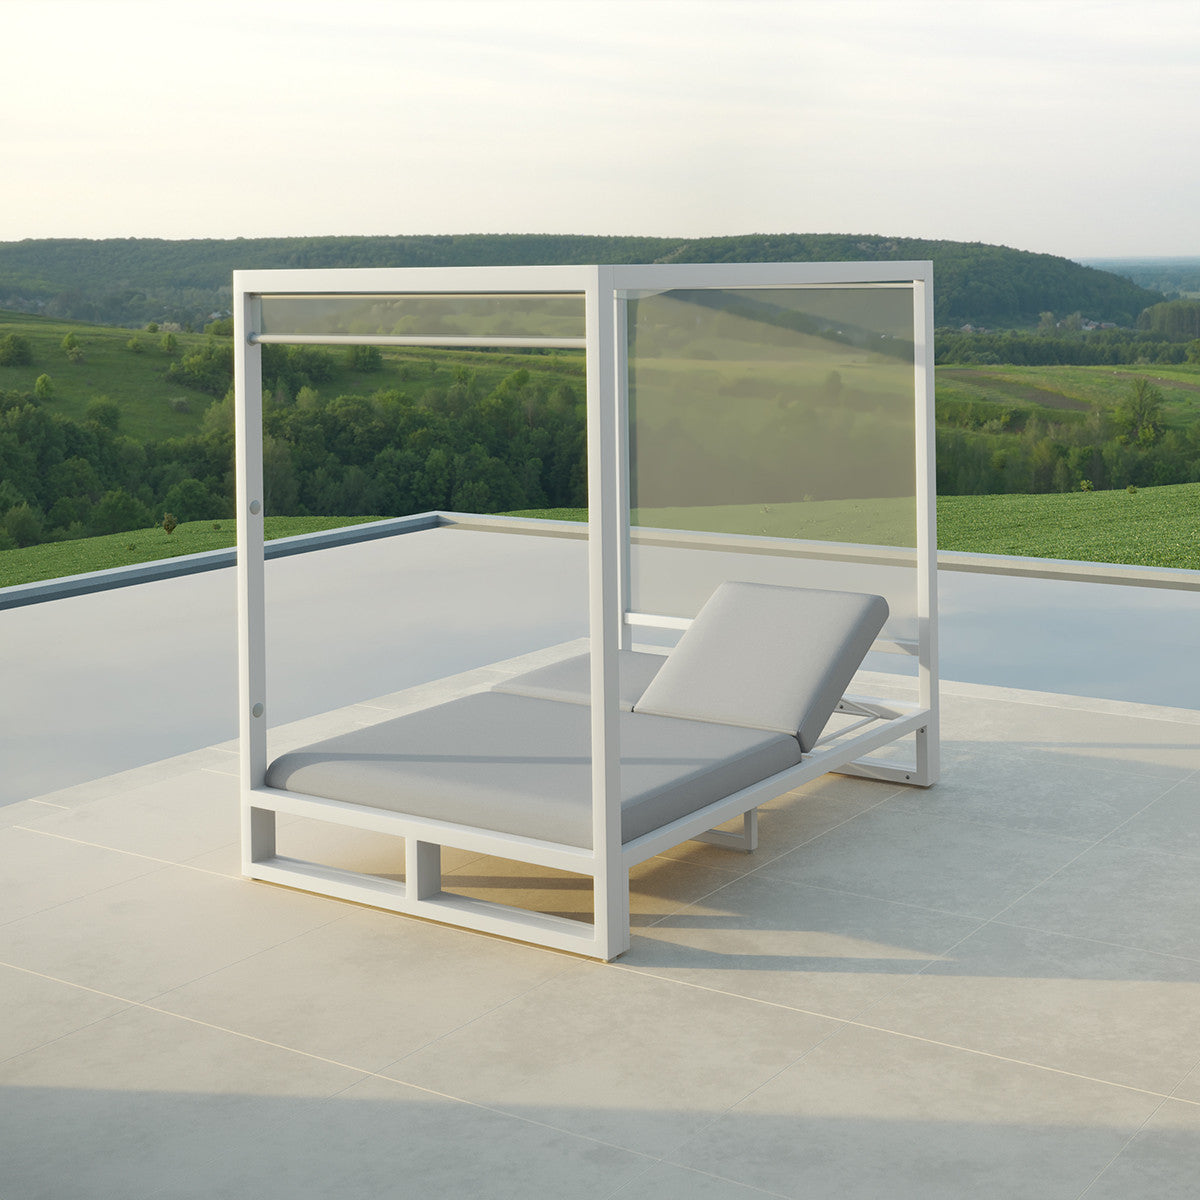 Allure Cabana Outdoor Fabric Daybed